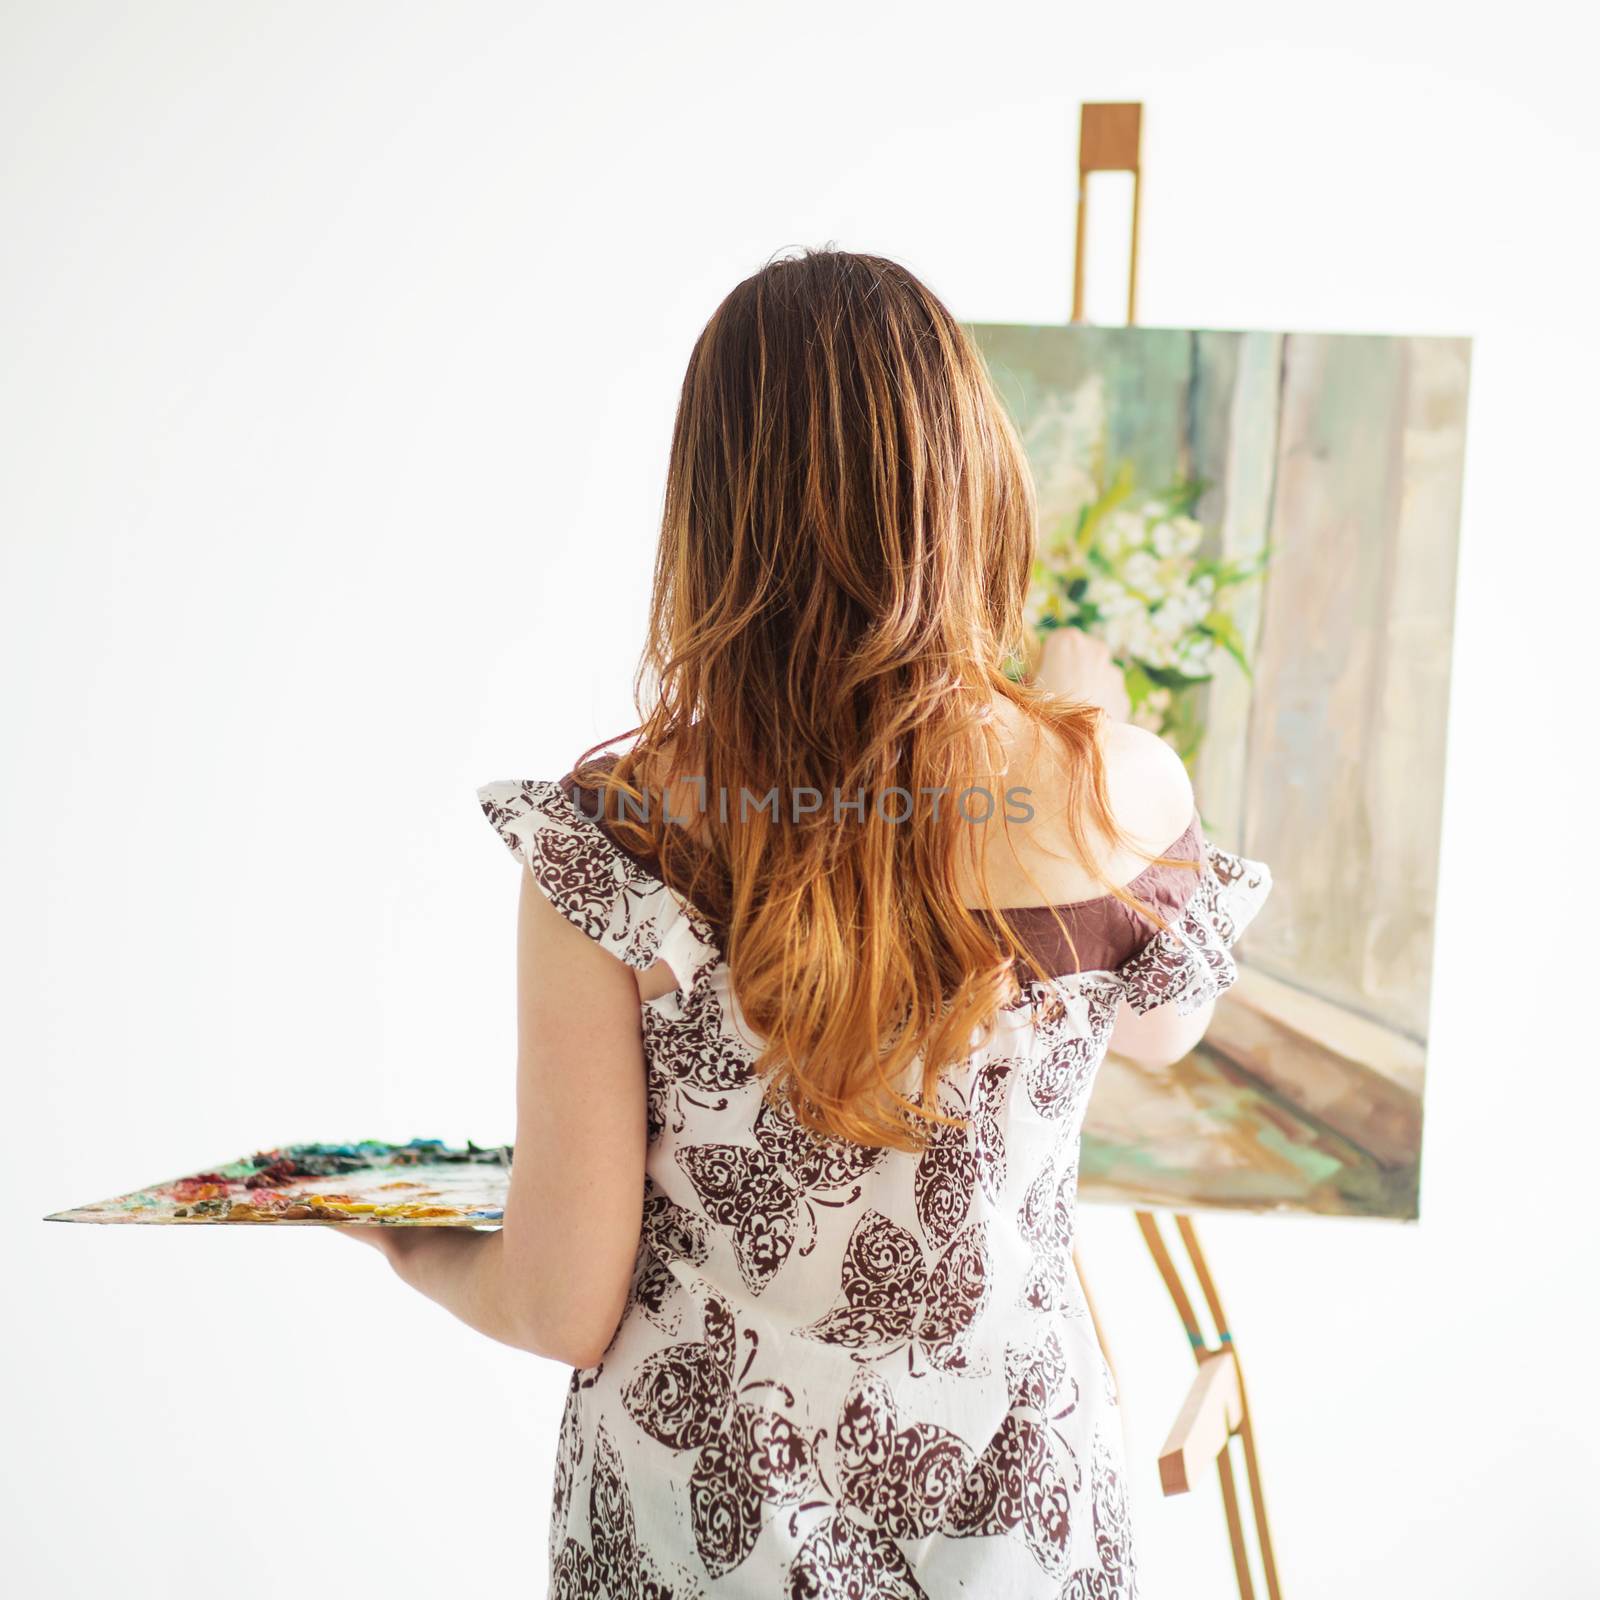 Woman Painting on a Canvas against white background by natazhekova